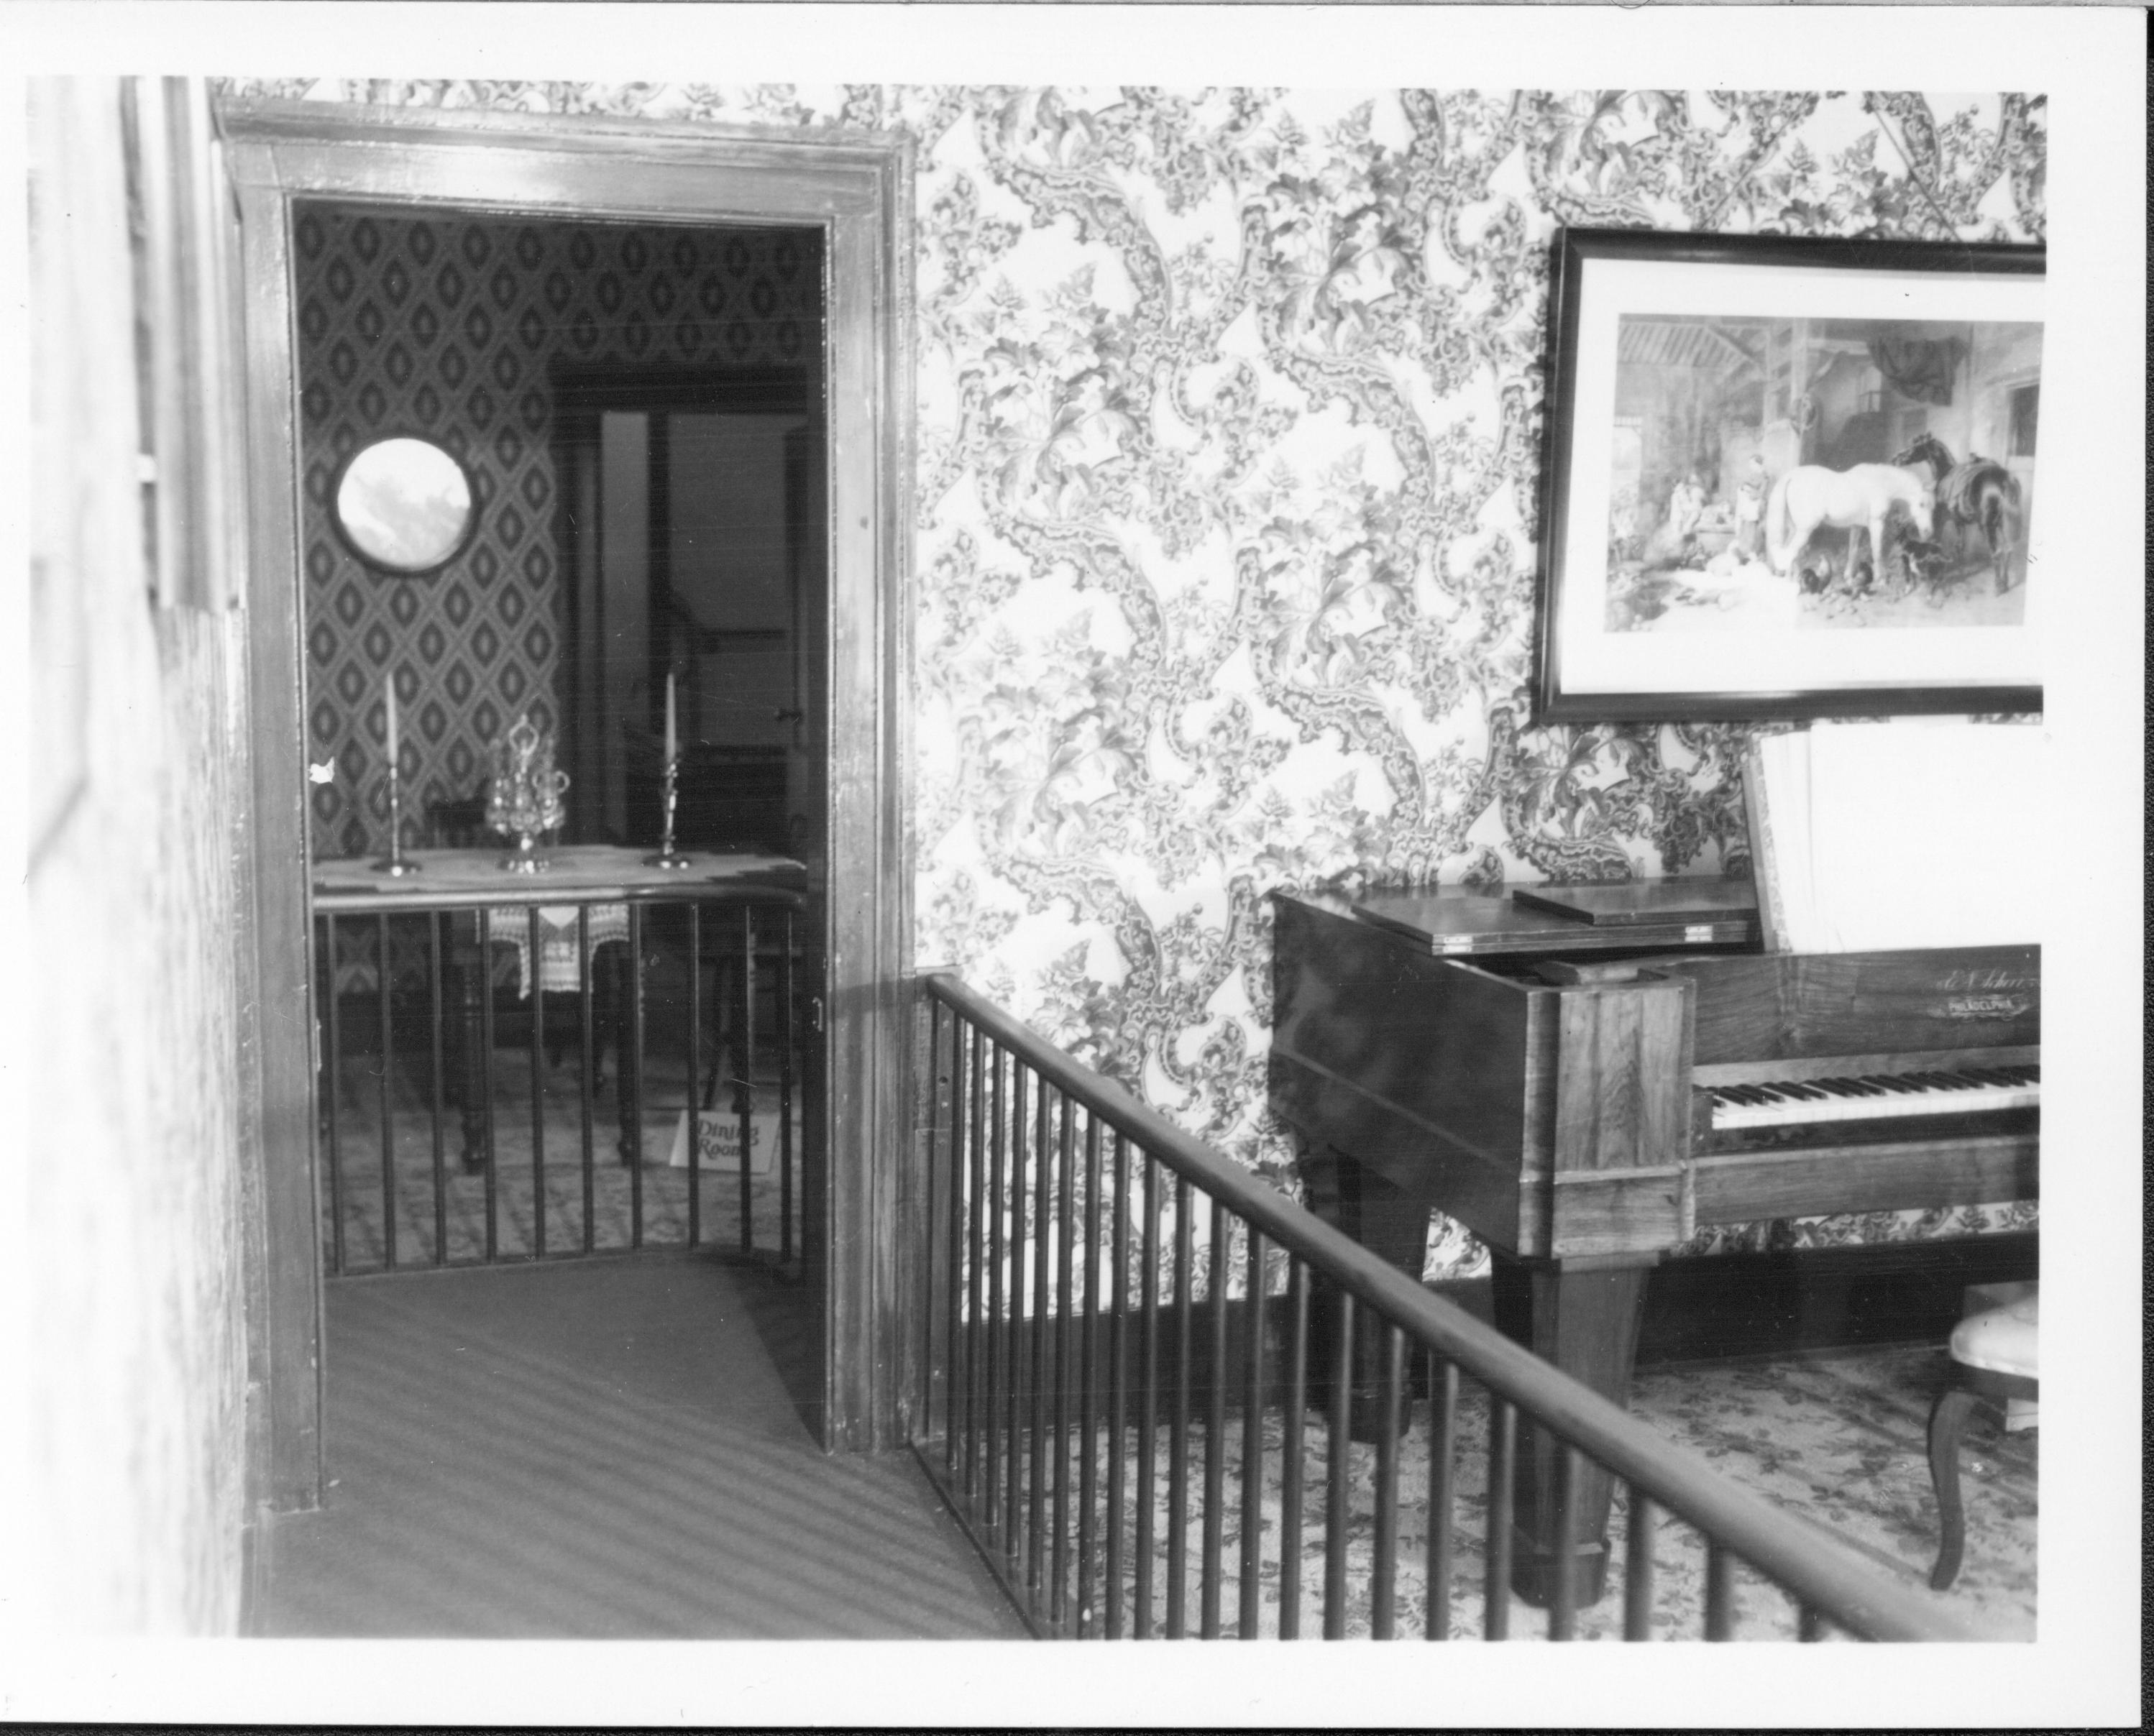 NA class 1, picture 78 Lincoln Home, Sitting Room, railing, piano, doorway